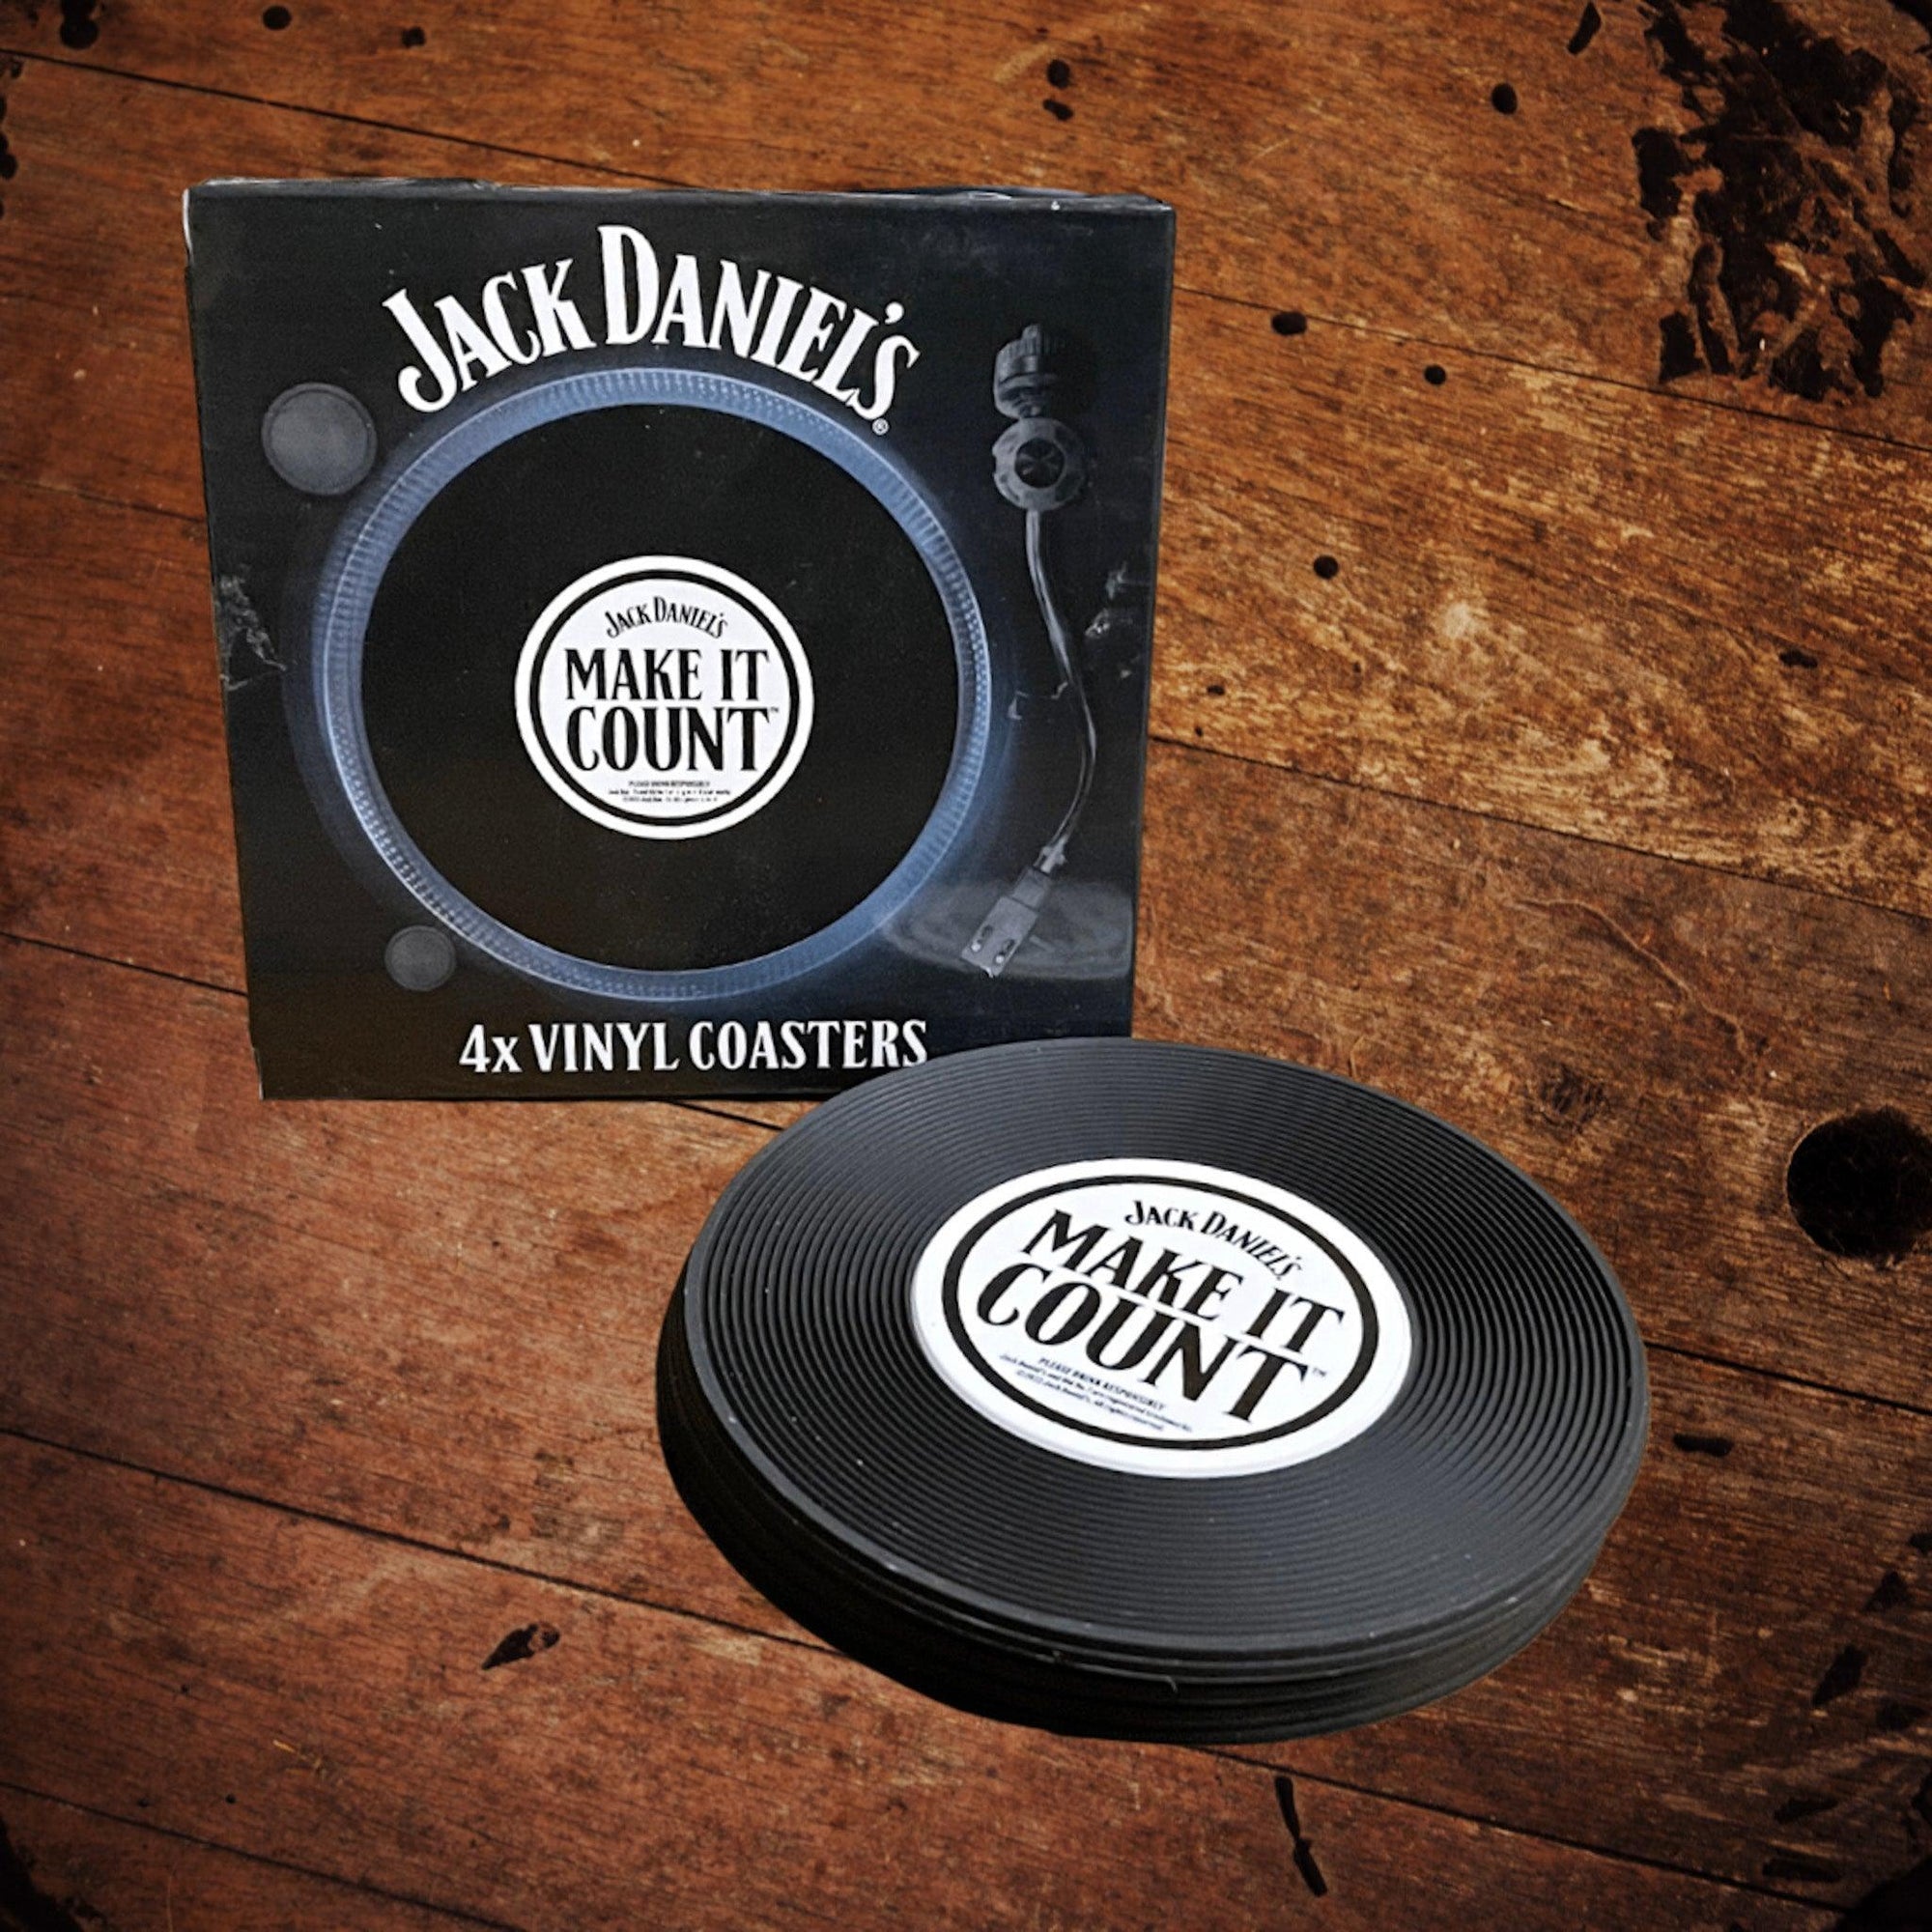 Jack Daniel’s Vinyl Coasters from the UK - The Whiskey Cave